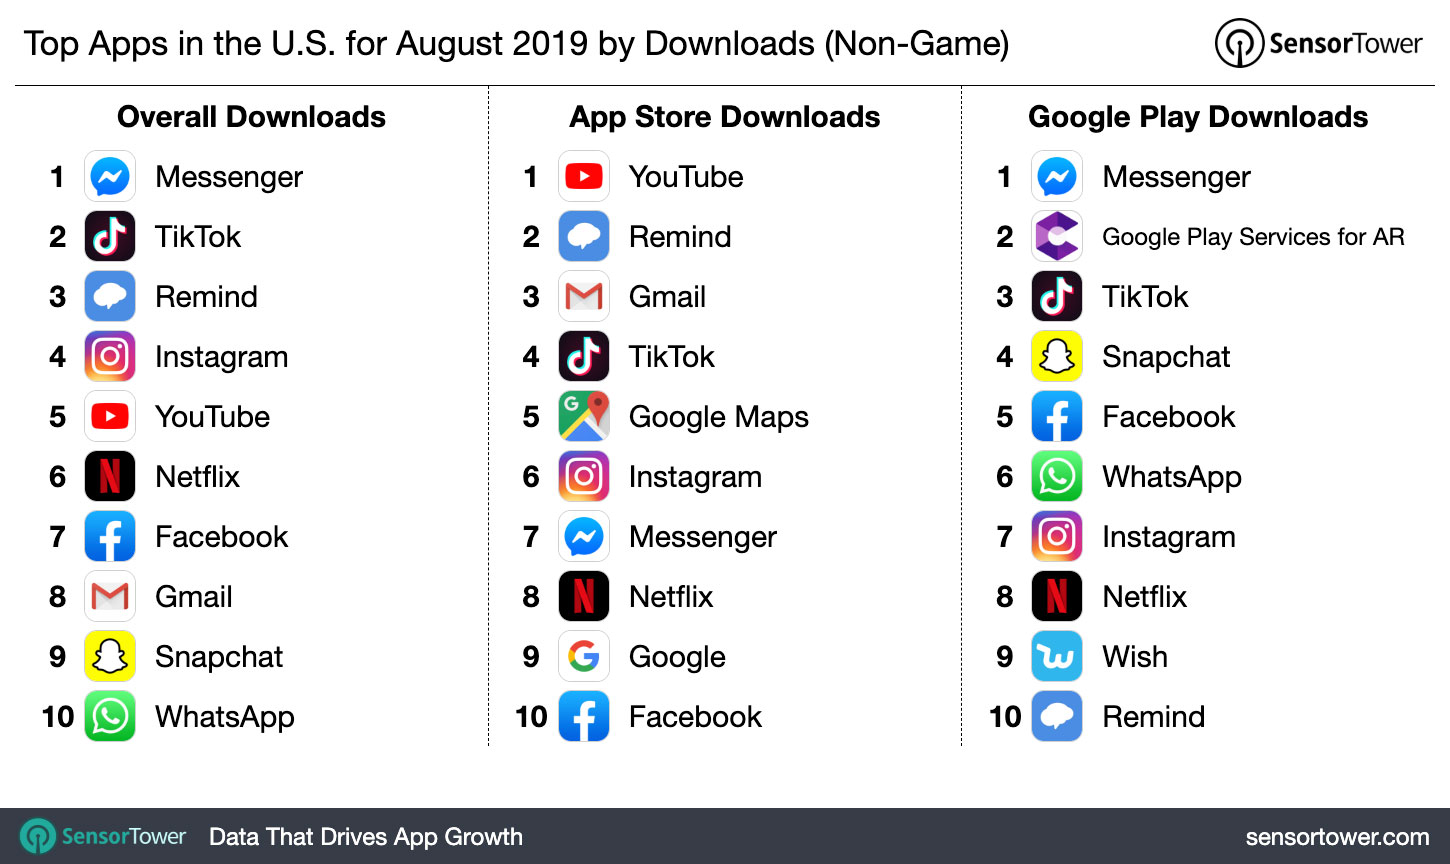 Top Apps in the U.S. for August 2019 by Downloads